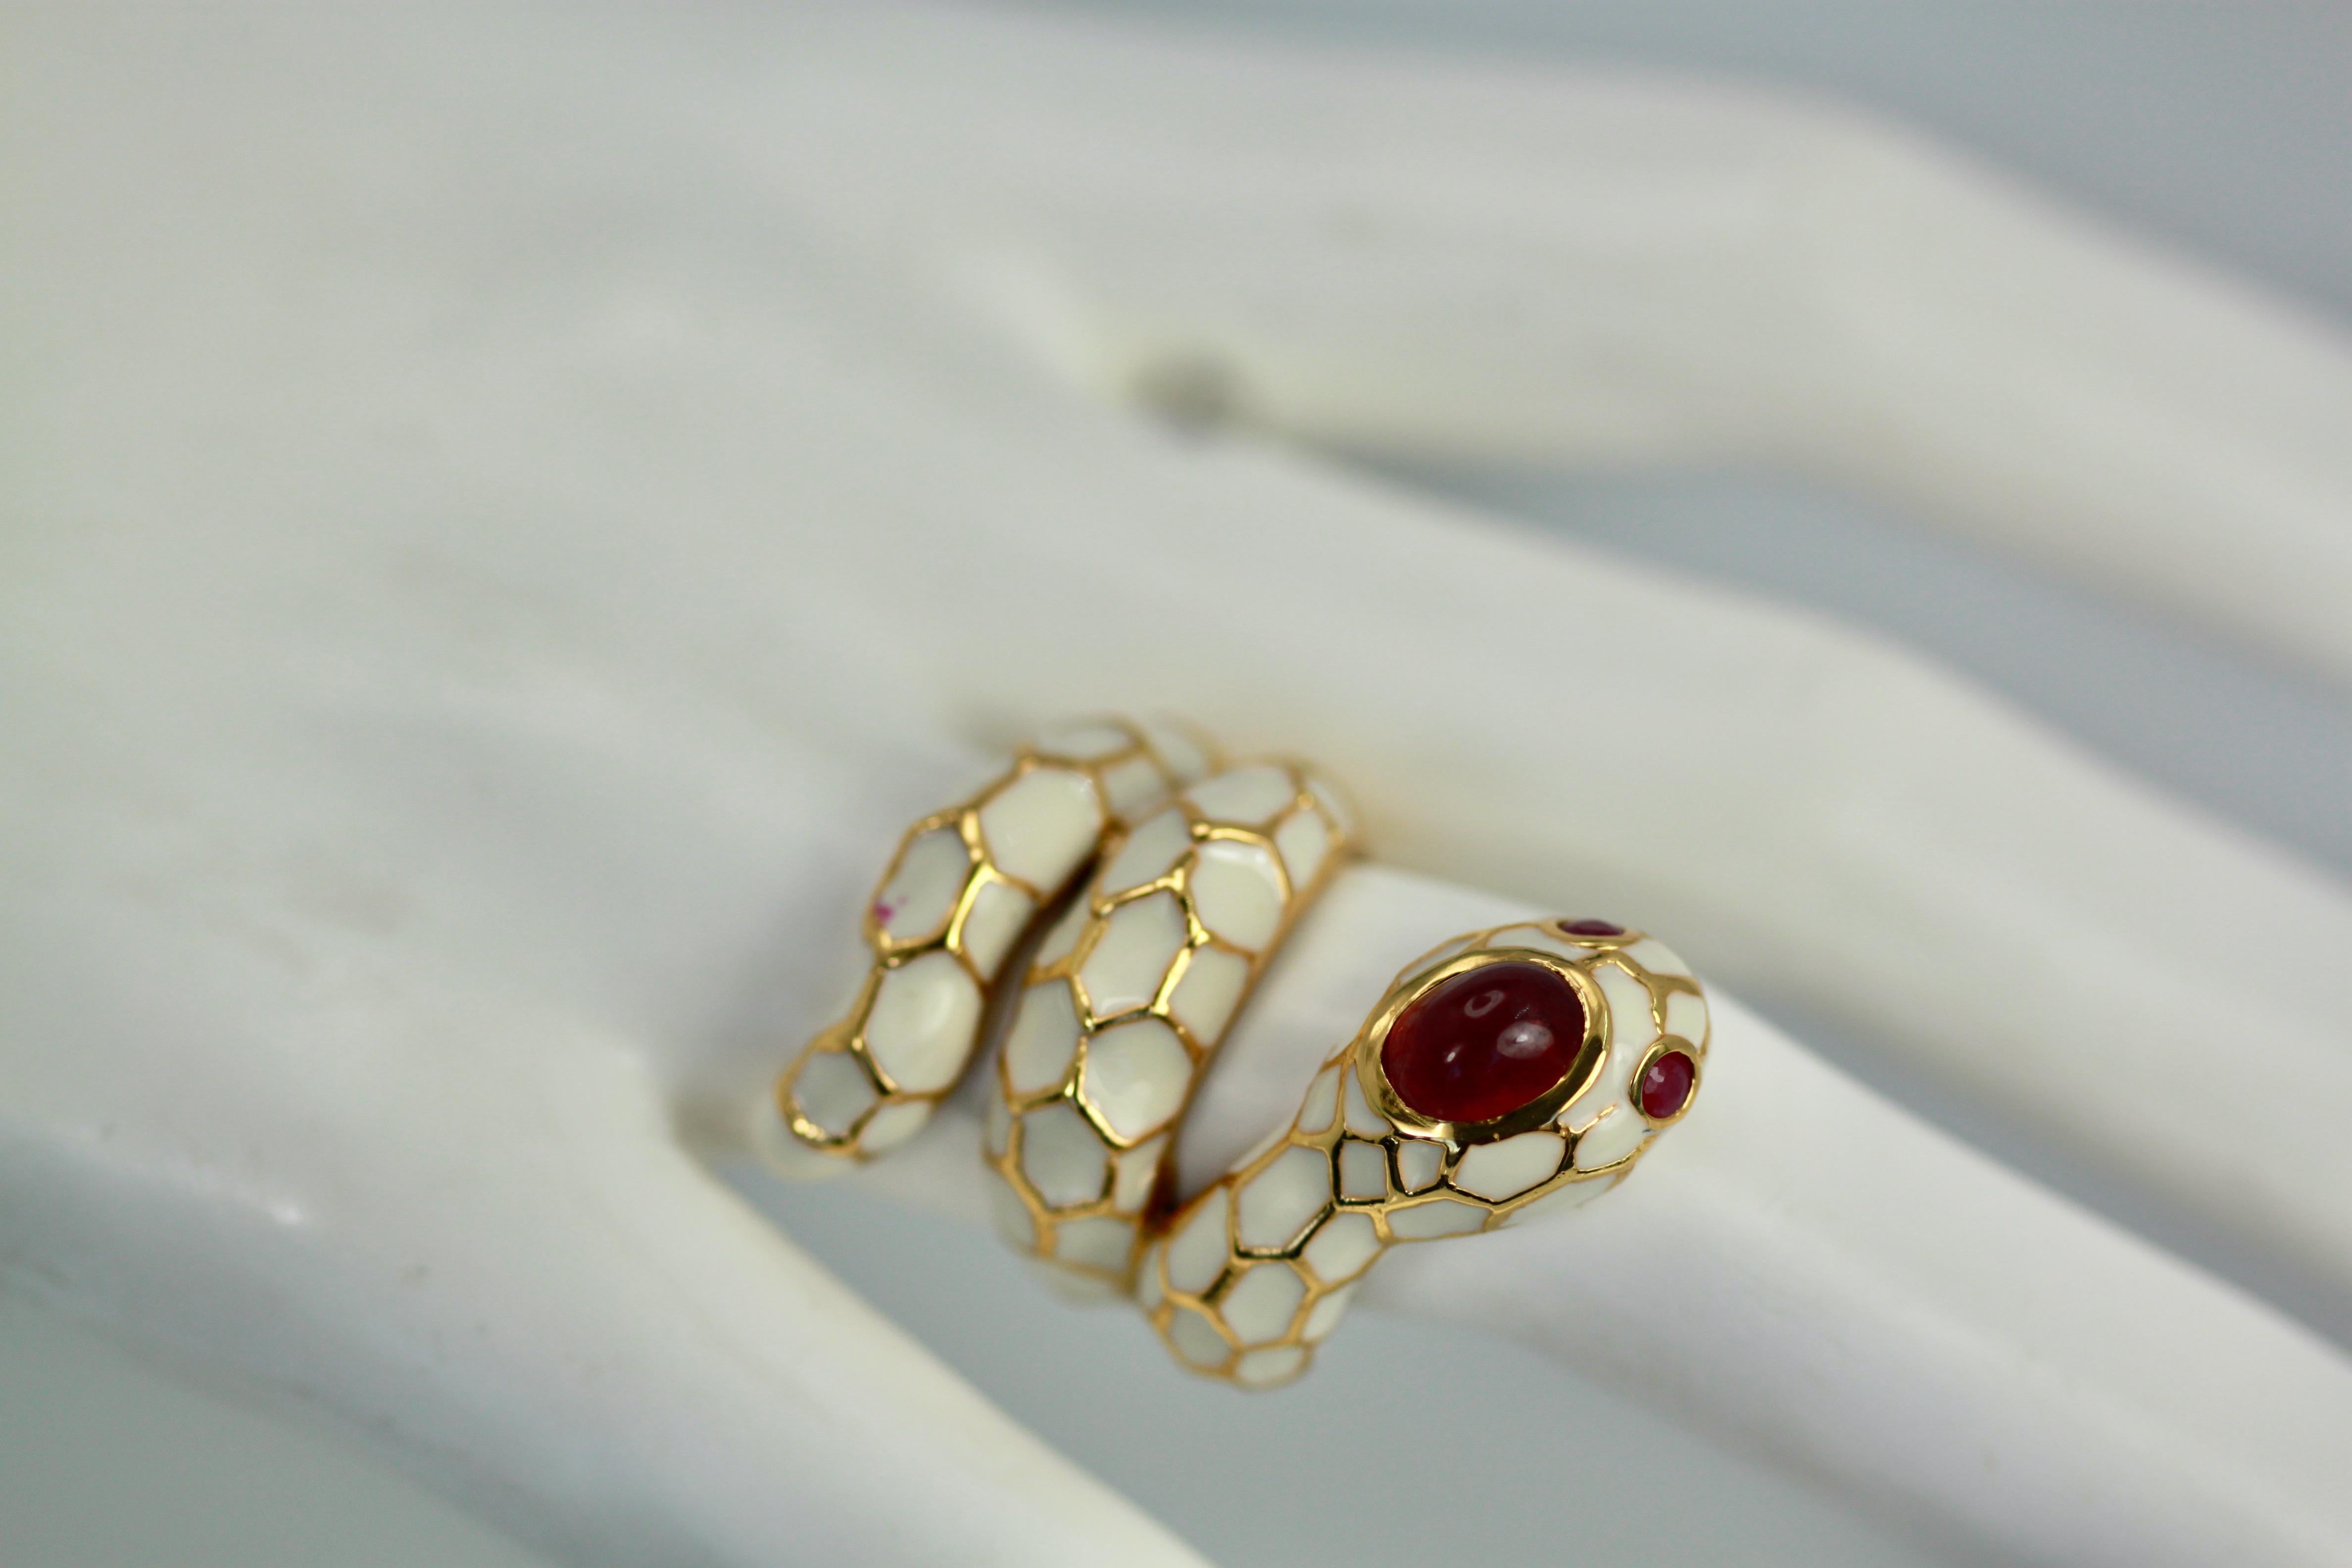 I usually do not purchase anything that is not 14K, 18K, or platinum but this snake ring really caught my eye. This lovely snake ring has a Ruby of 1 carat, two (2) Ruby eyes of 0.10 ct each.  This ring is done in white enamel with a Gold wash. and